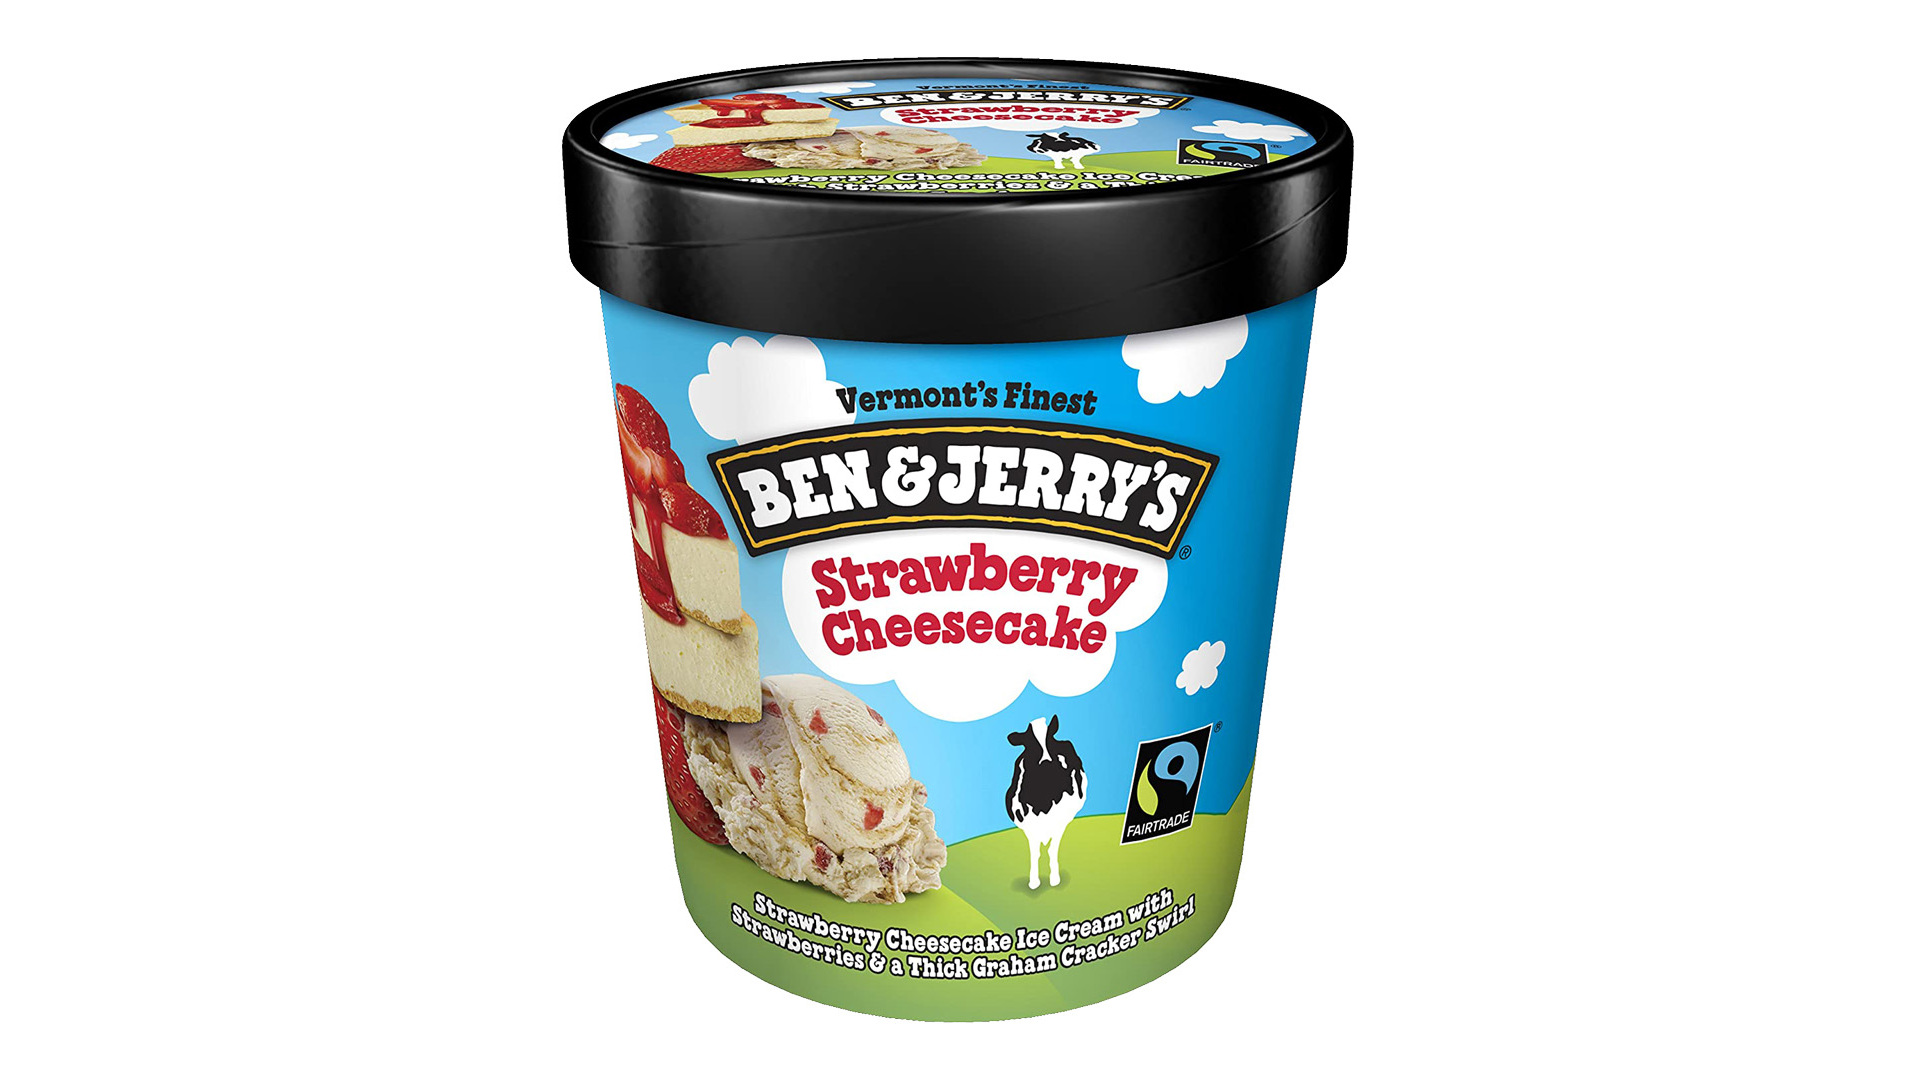 Ben & Jerry's Strawberry Cheesecake 500ml - Wraps Delivery in Leytonstone E11